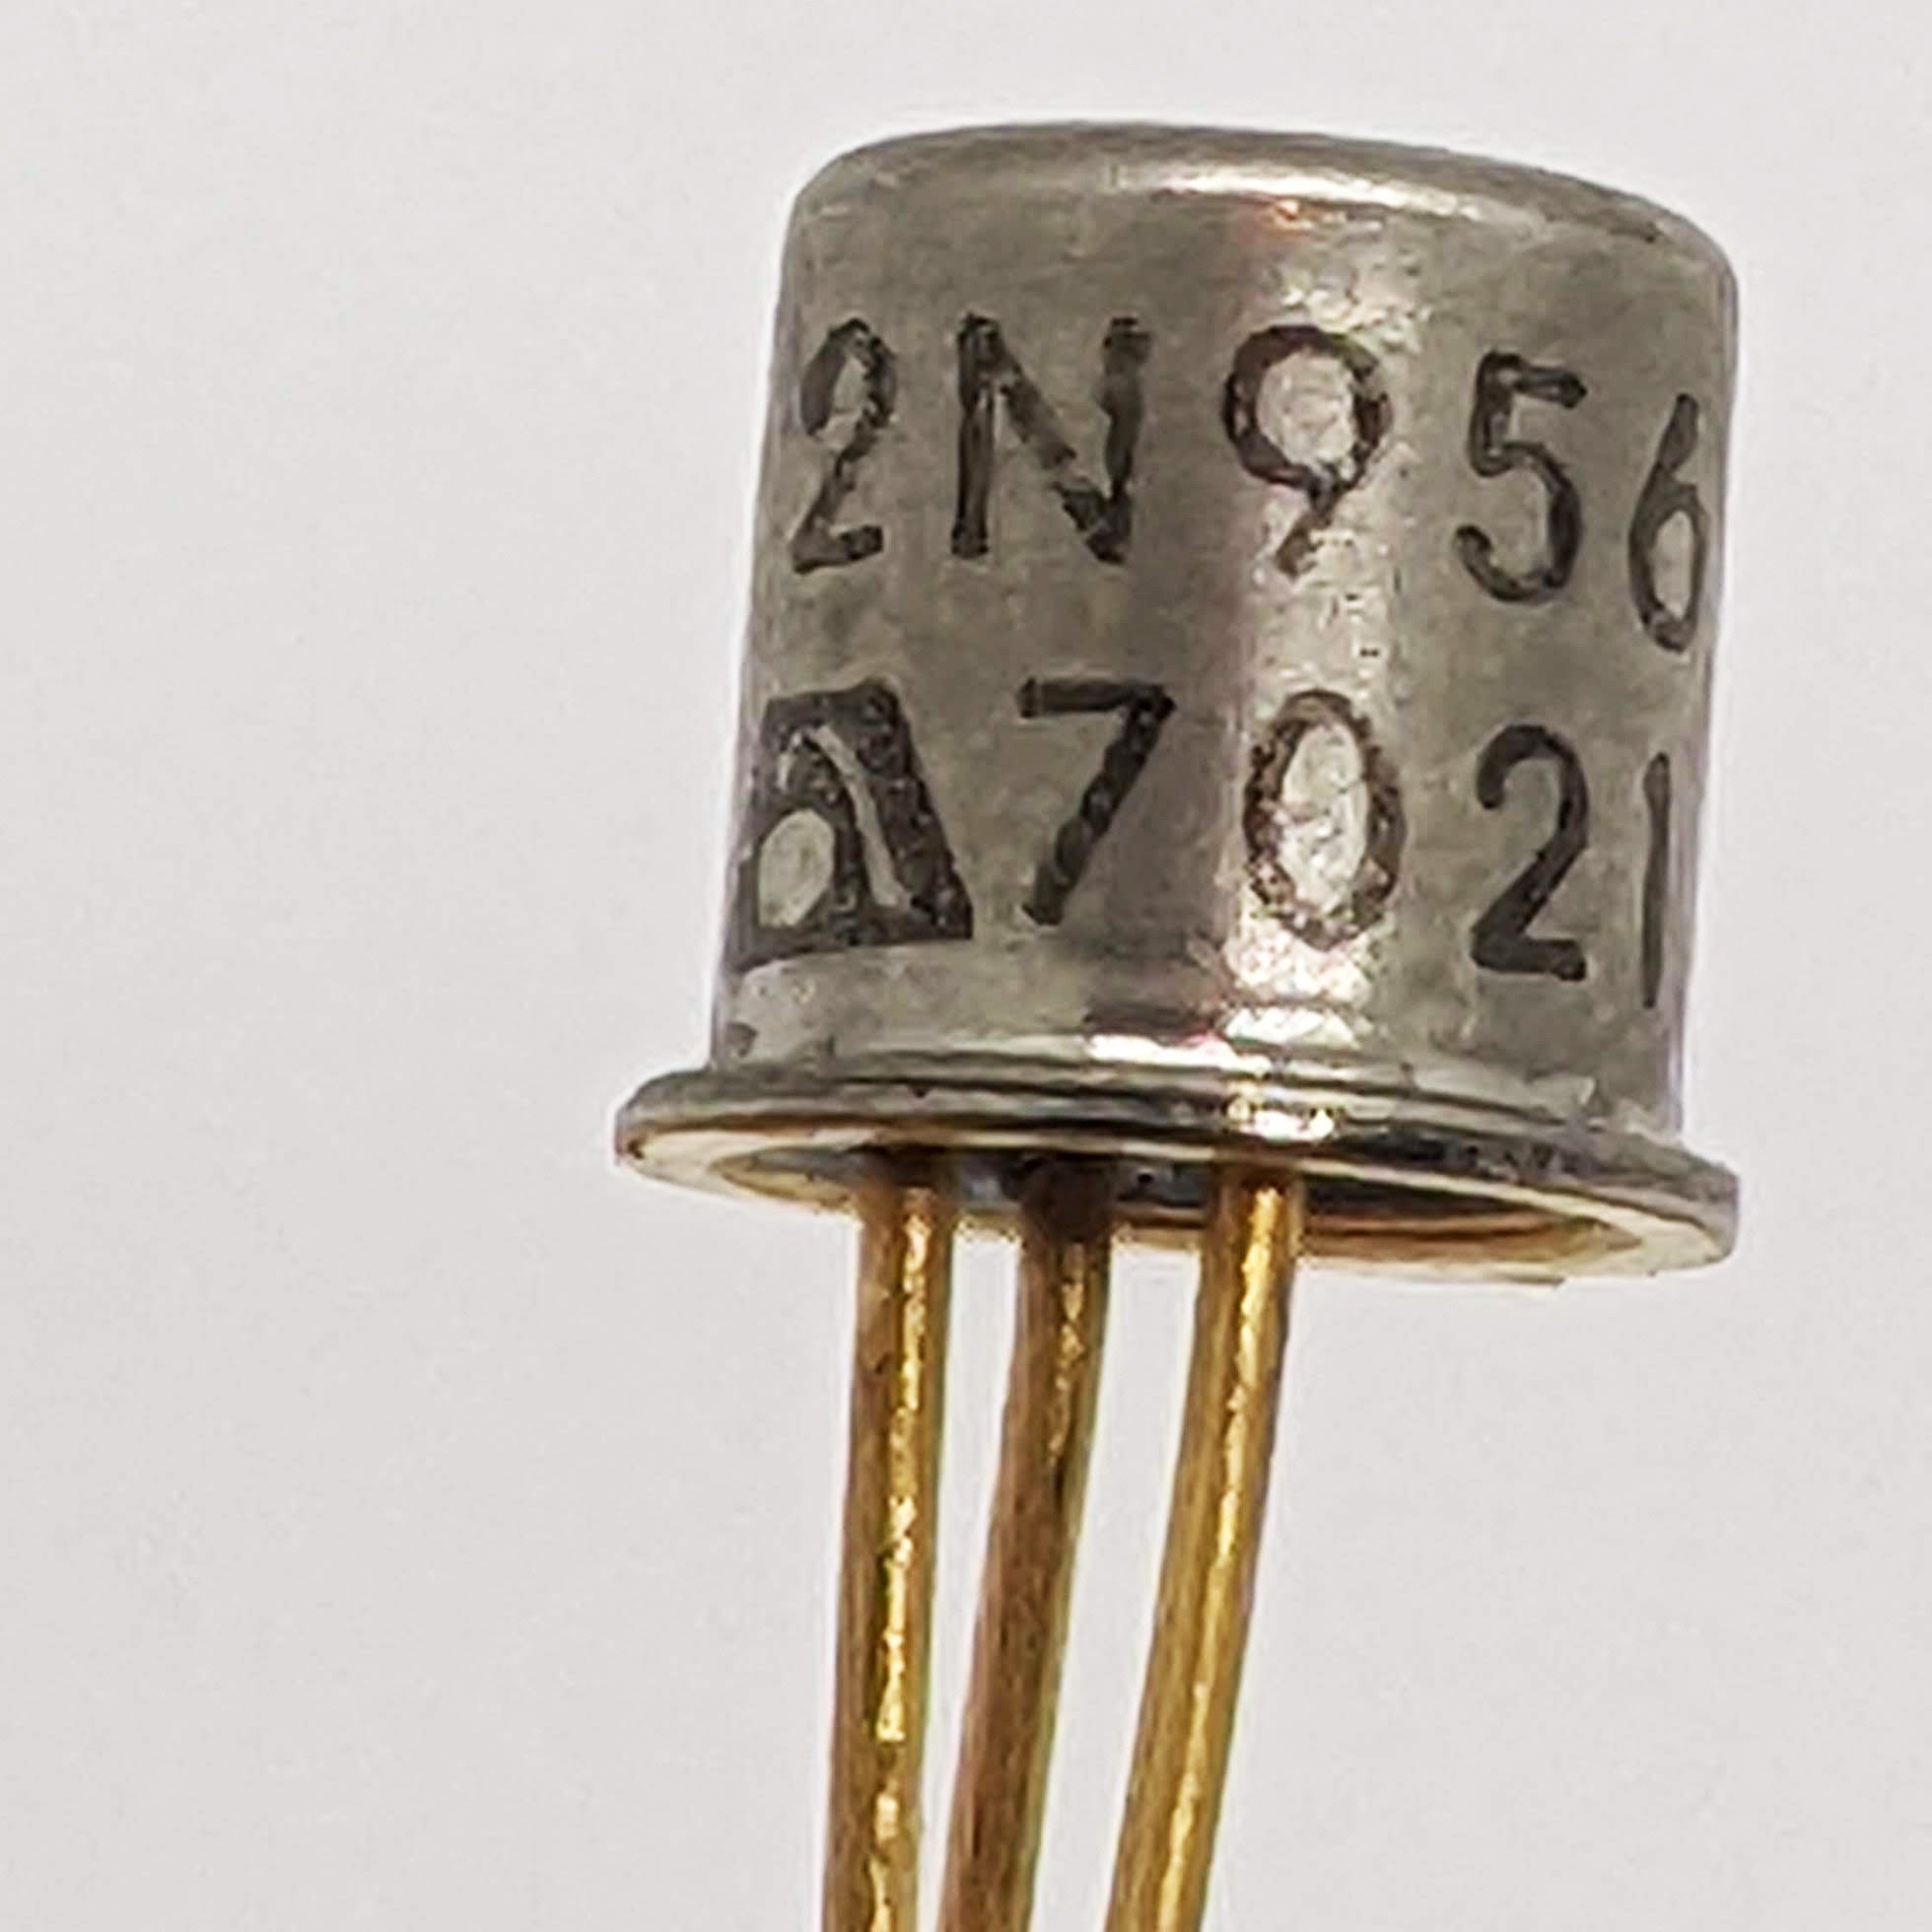 Rockwell/Collins Mil-Spec New Transistor 2N956, Date 19714, 352-00400-041